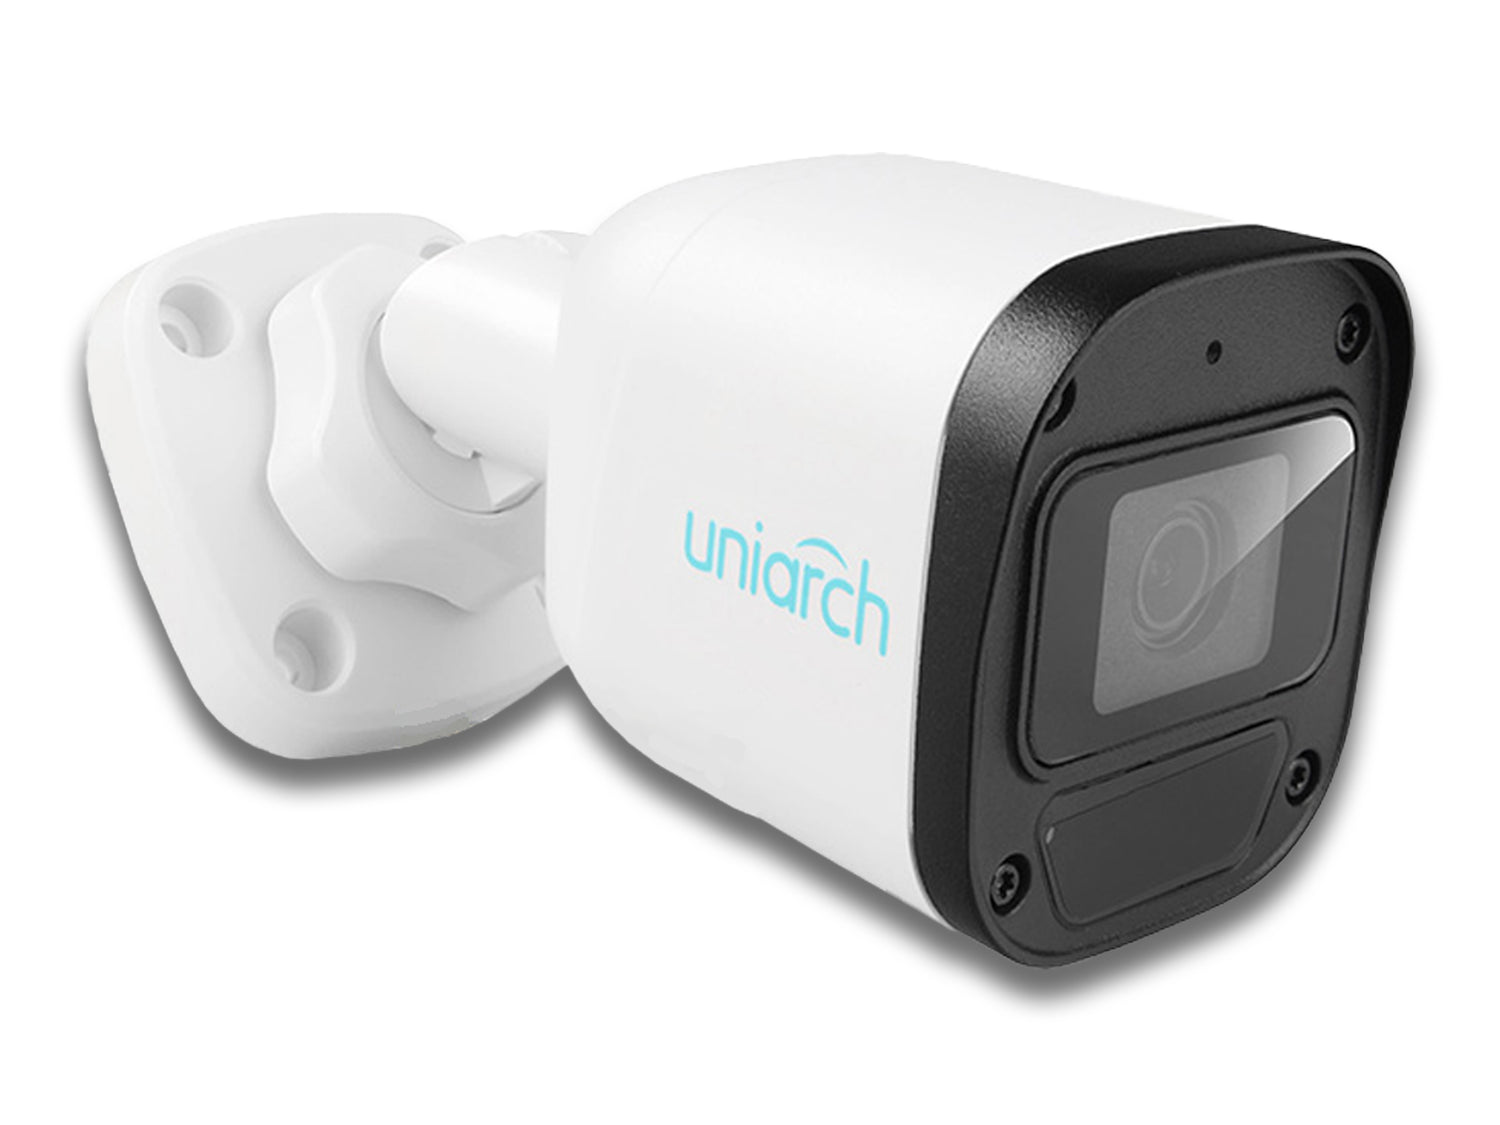 Uniarch 2mp Bullet IP Camera Right Side View on The White Background